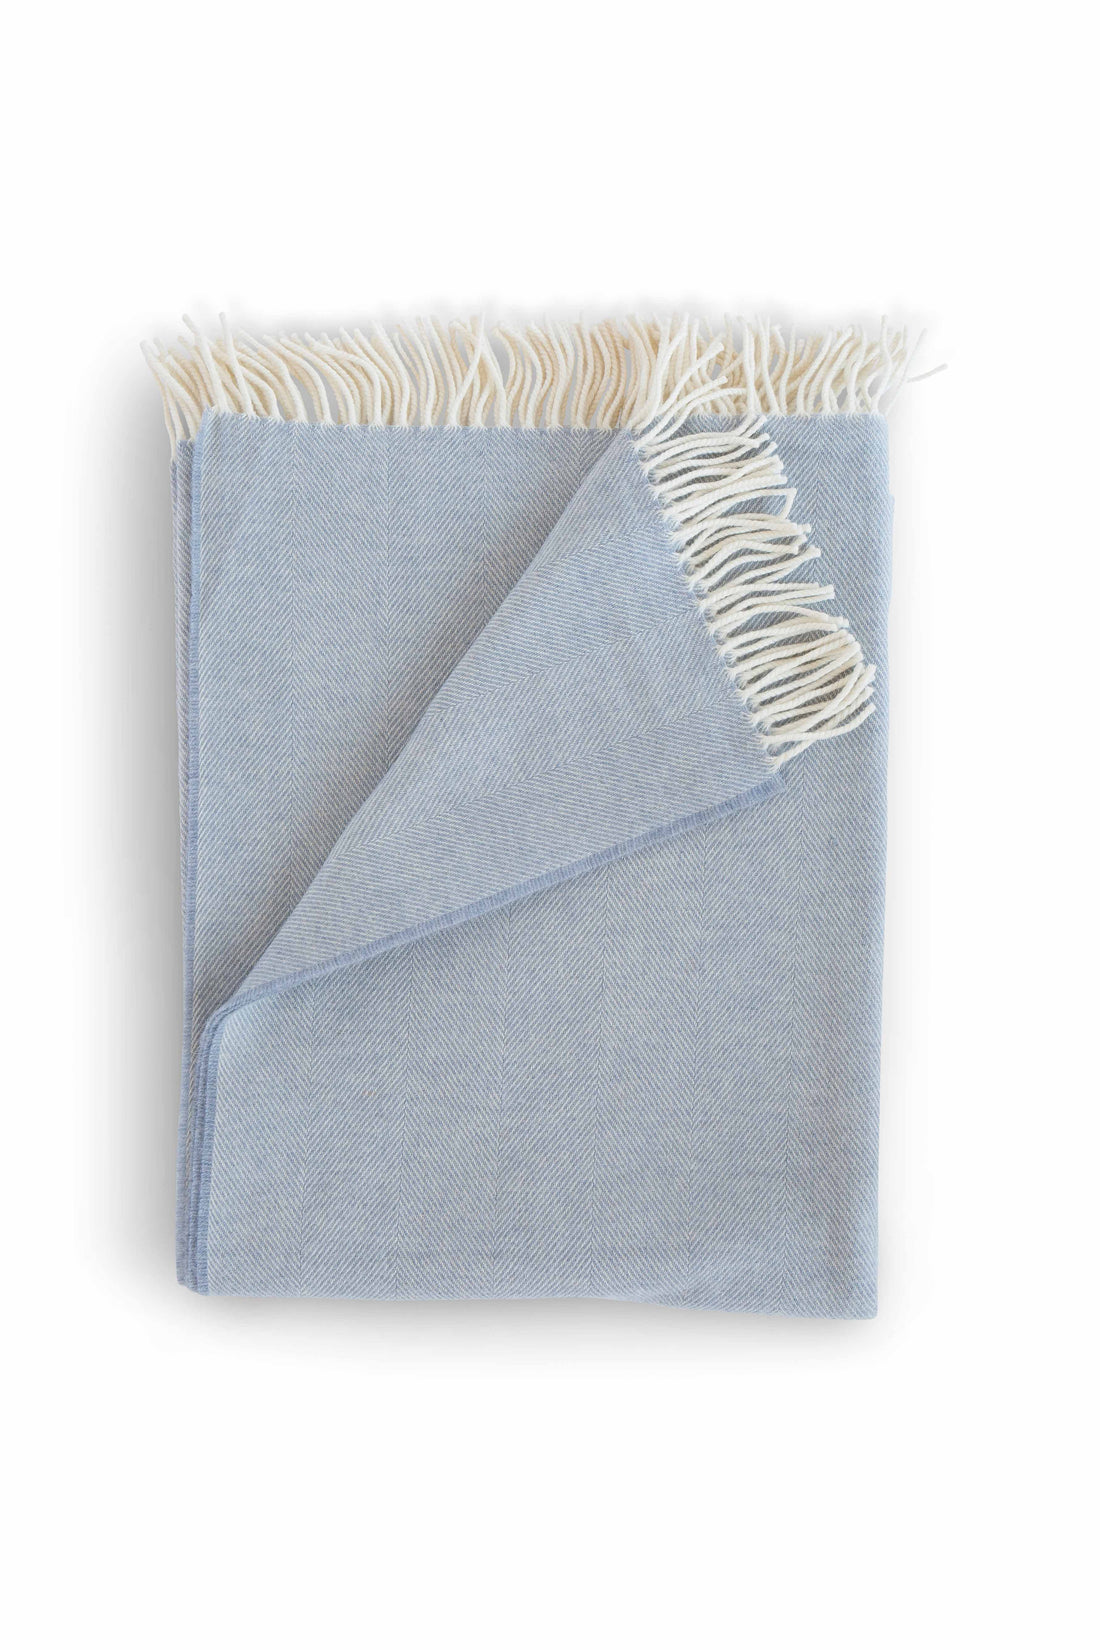 Evangeline Lightweight Herringbone throw with a tasseled edge in color Dawn, folded against a white background. The lighter weight 'sibling' to our popular Herringbone Throws.  Oh-so-soft. And perfect for summer nights.  